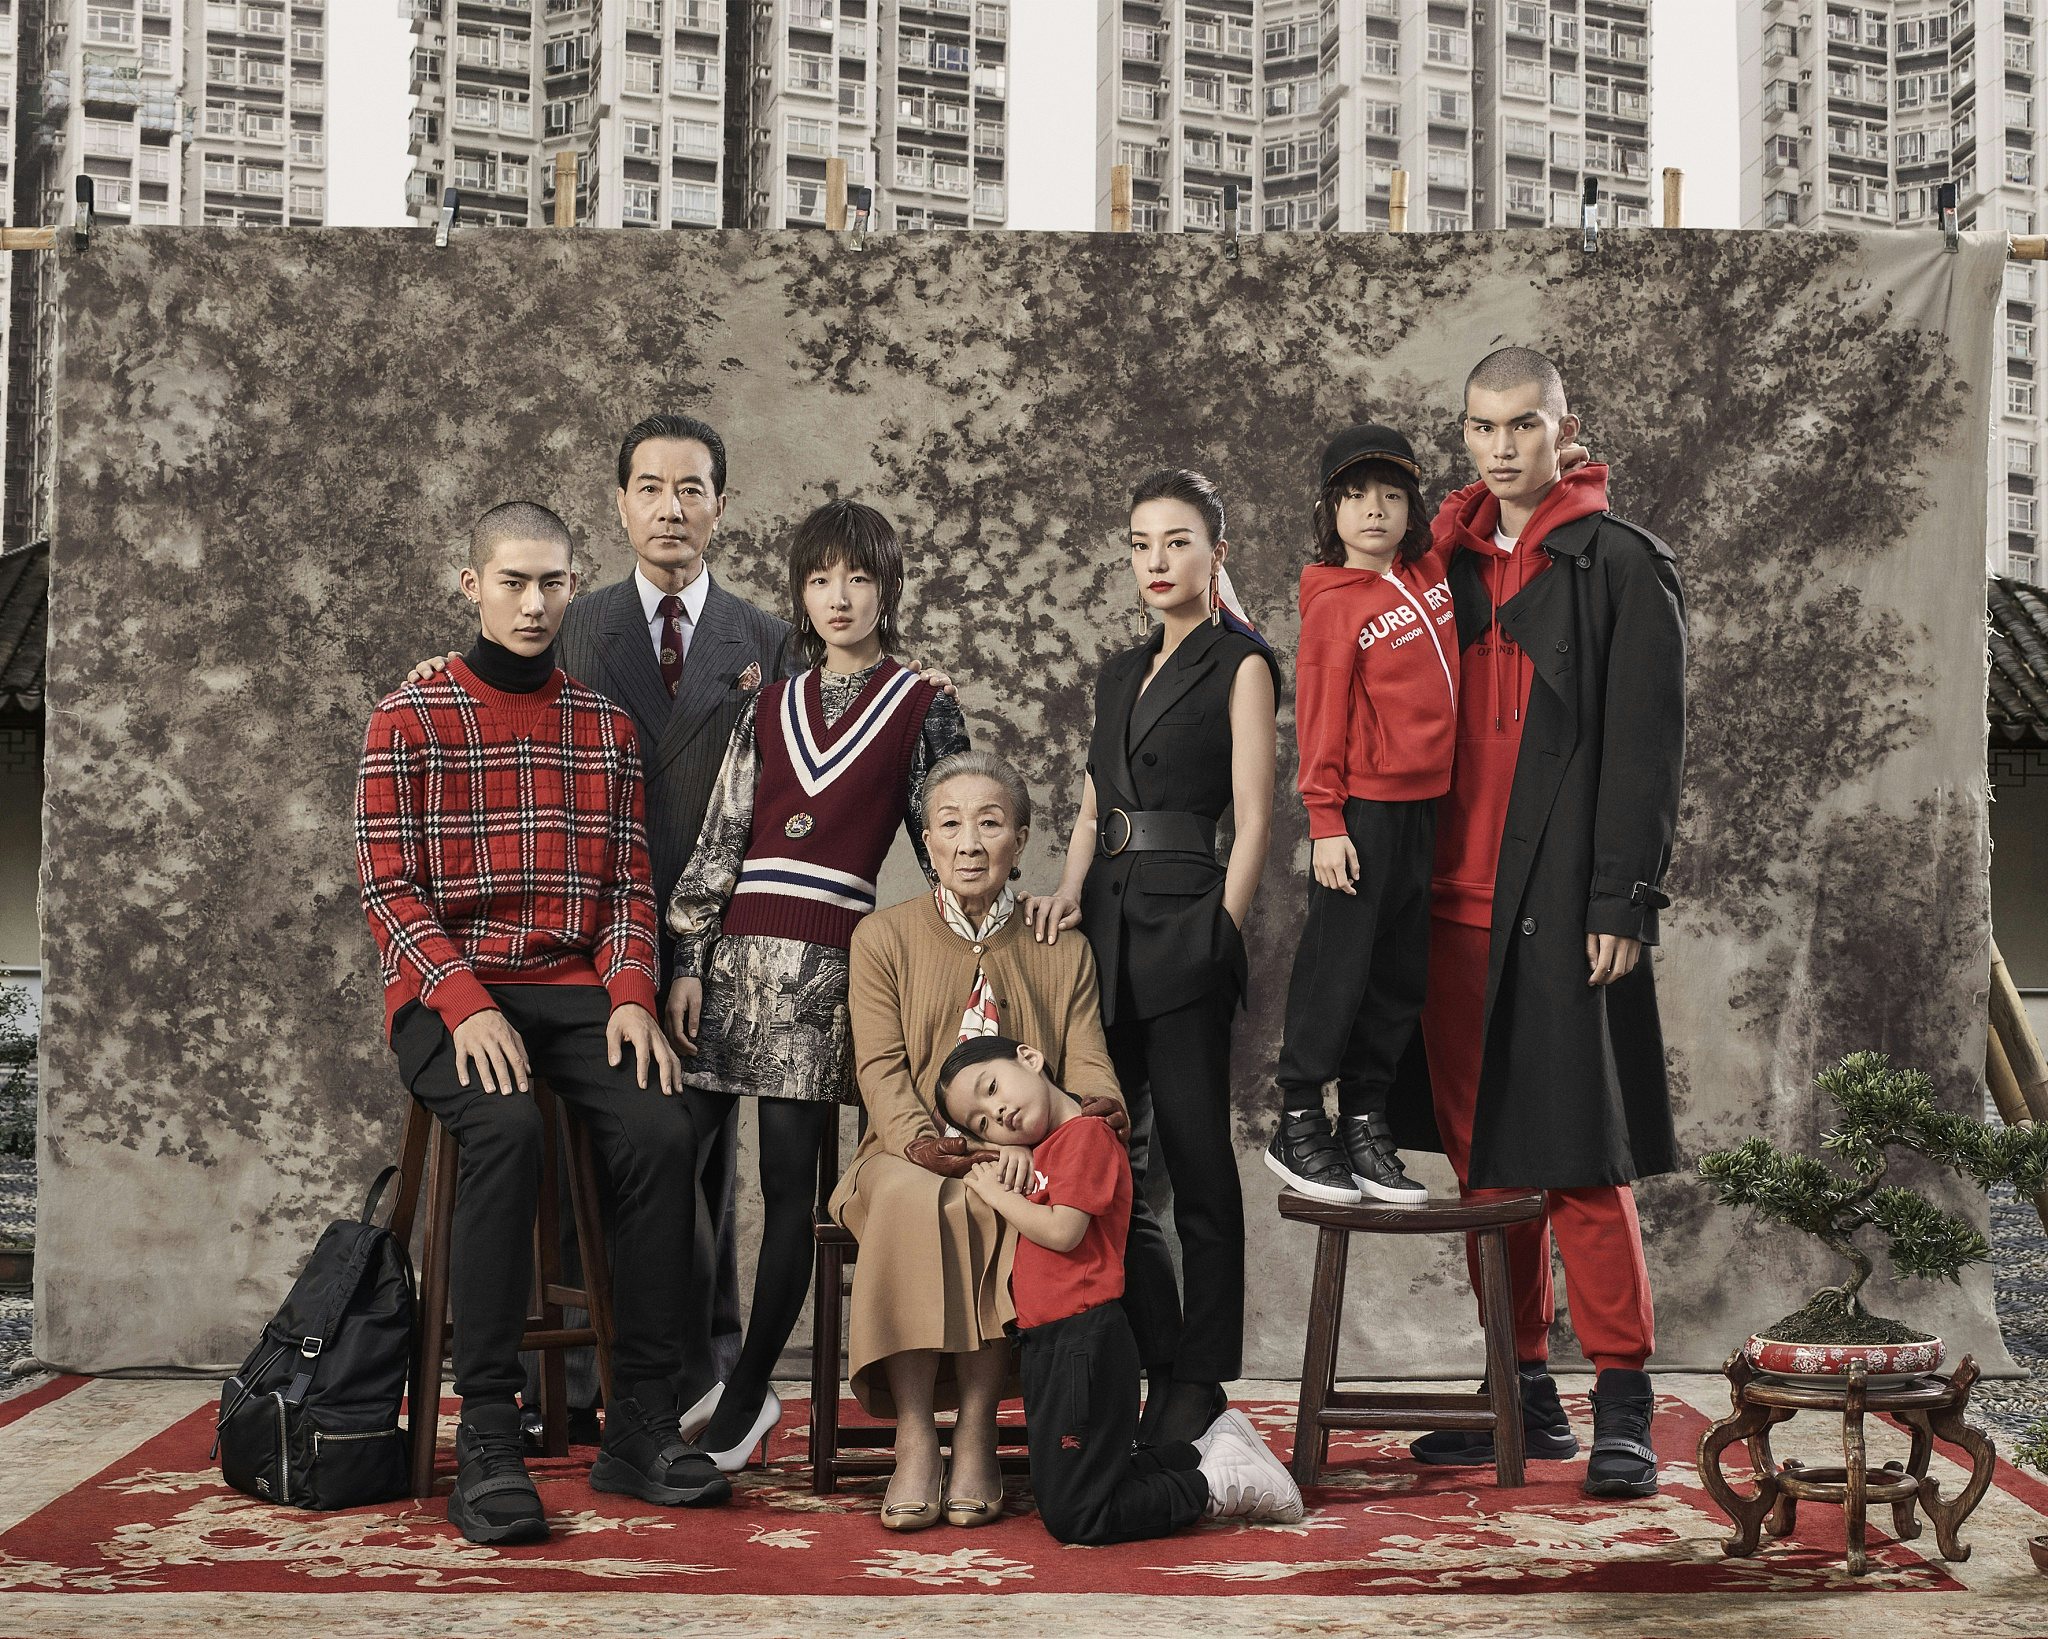 Burberry’s Chinese Lunar New Year tribute draws online controversy over creepy fashion shots that shows a lack of understanding of CNY culture. Photo: VCG